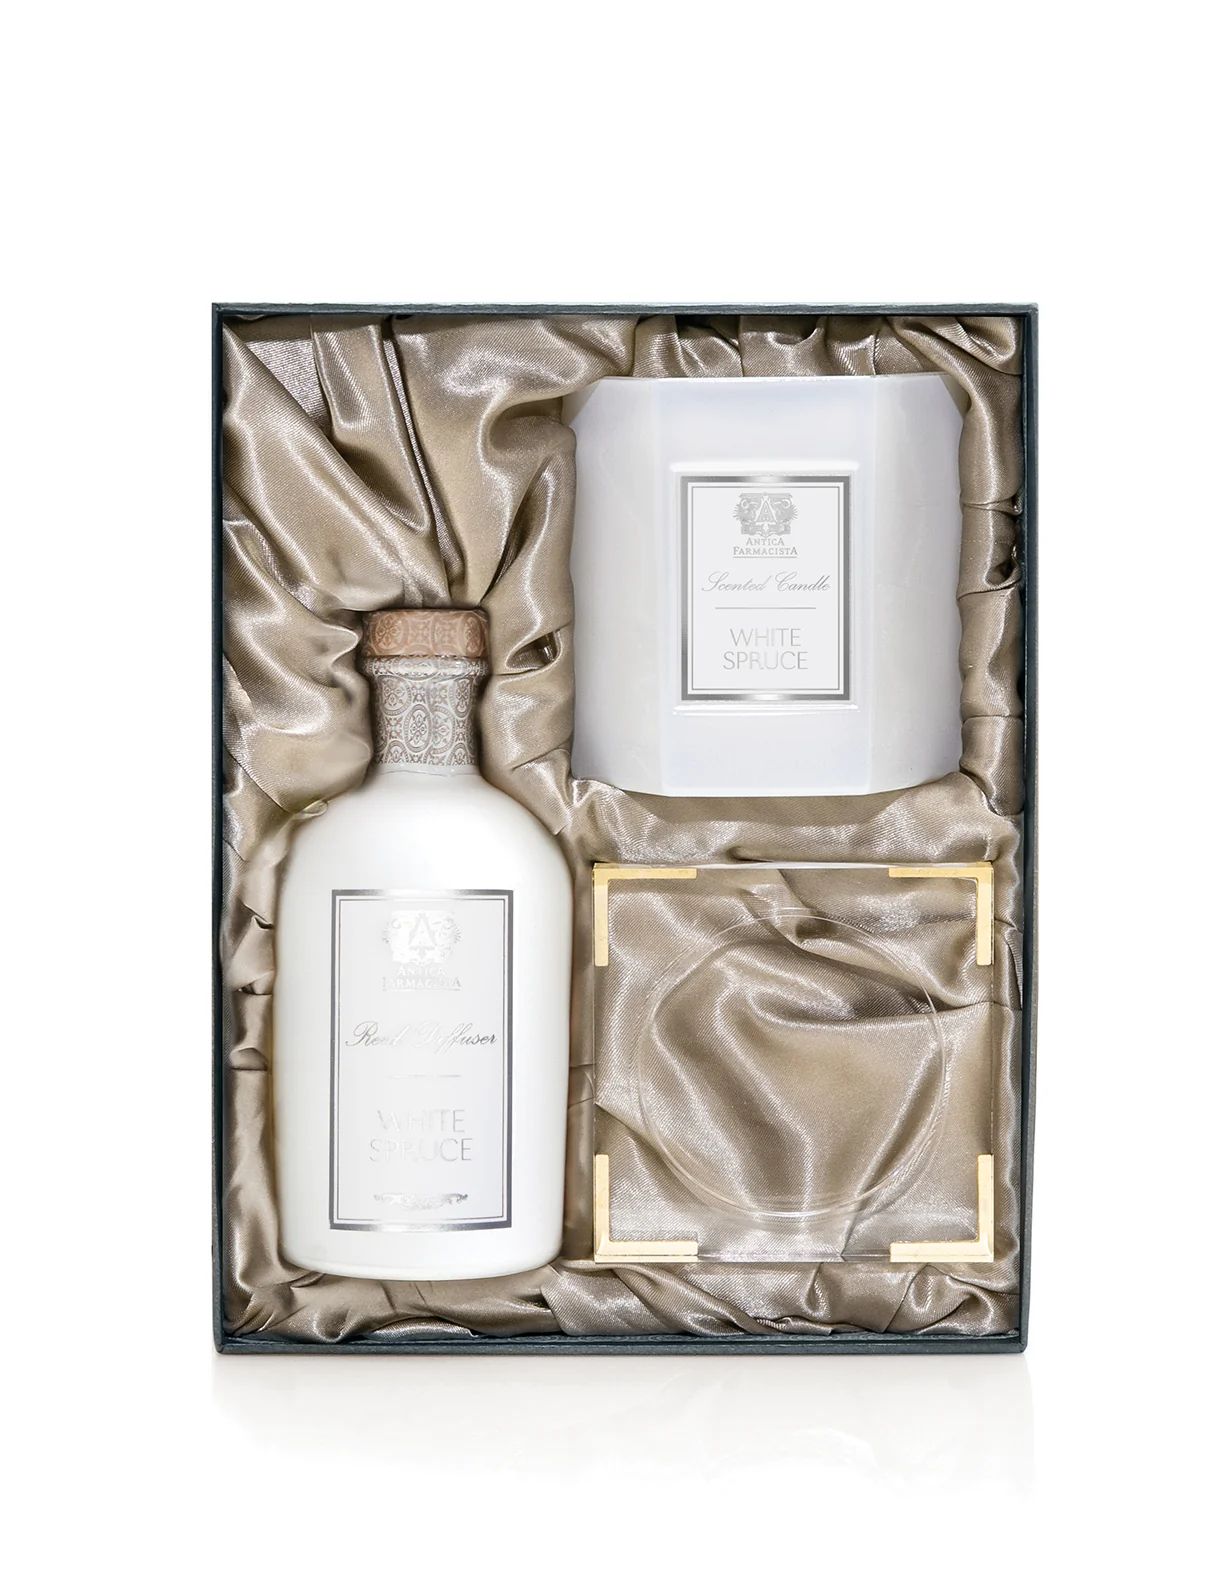 Acrylic Home Ambiance Gift Set: White Spruce | Antica Farmacista